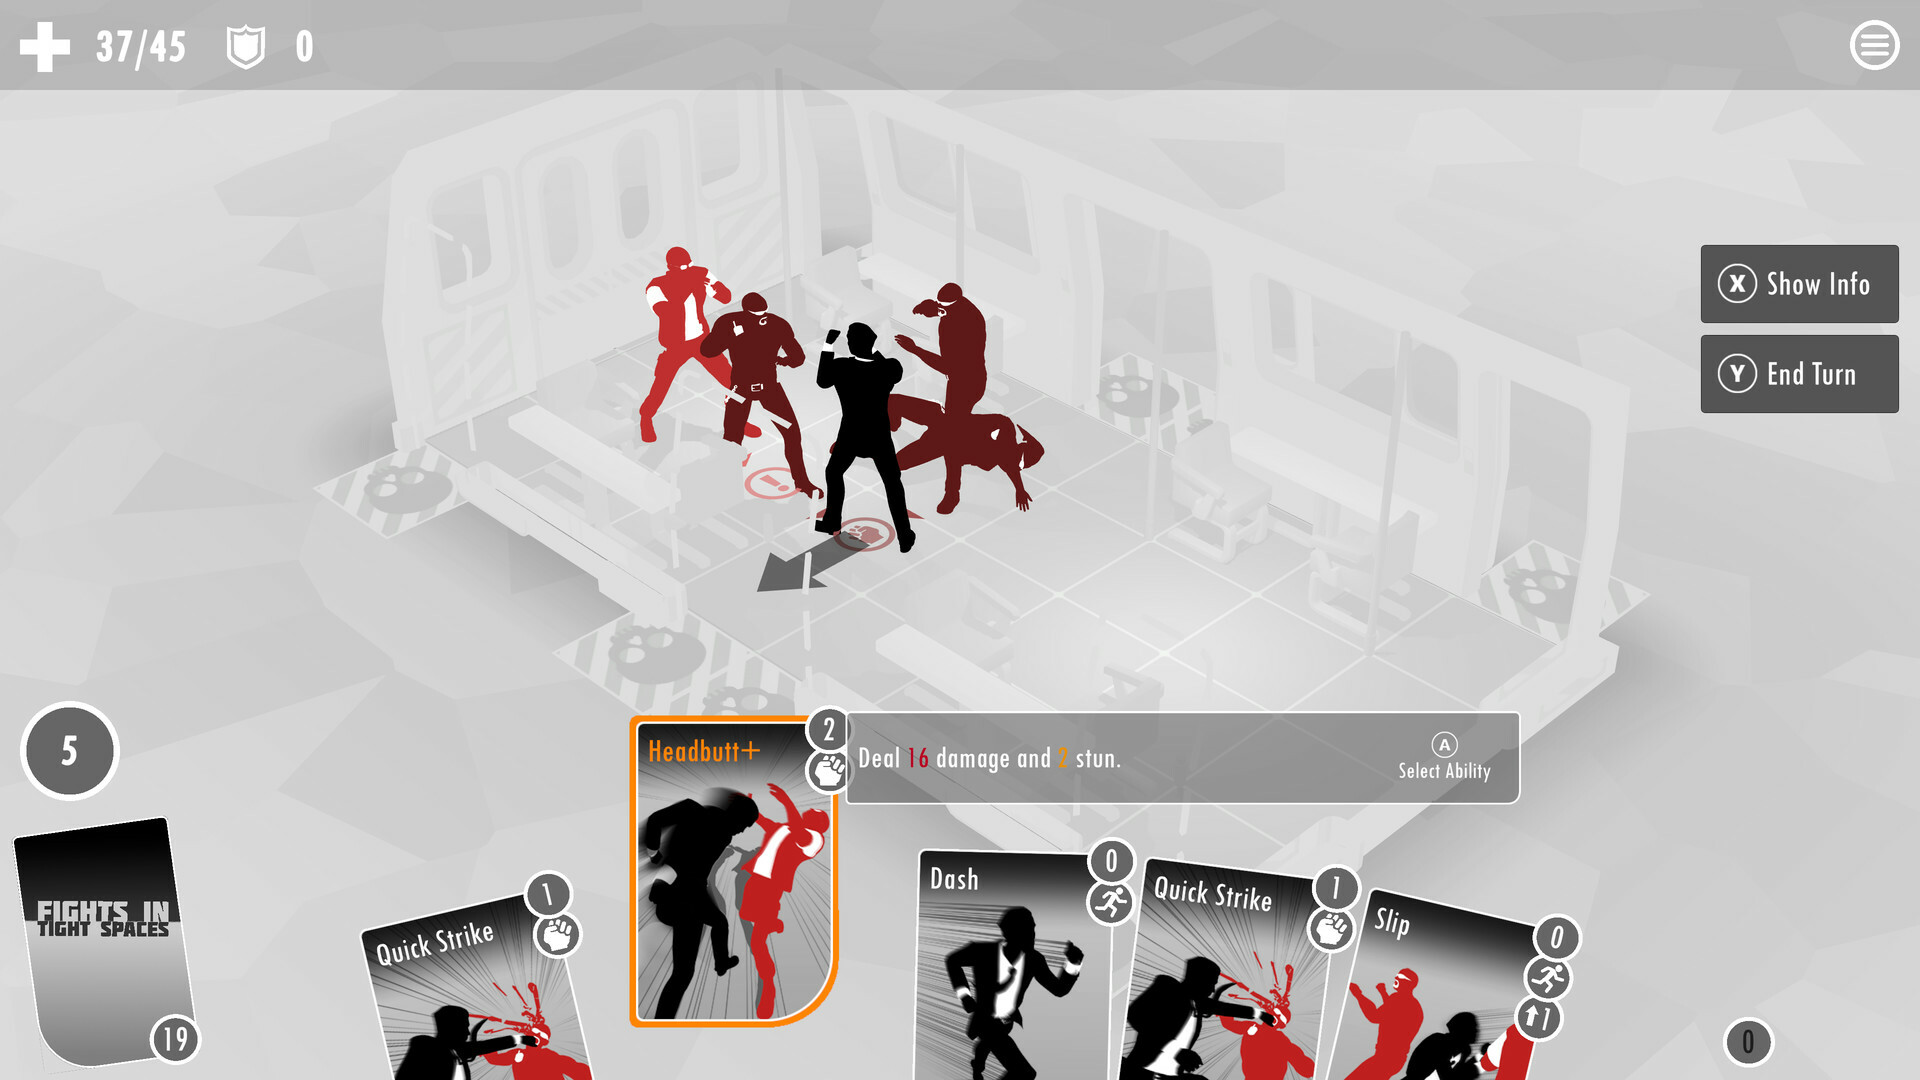 fight-in-tight-spaces-pc-screenshot-1